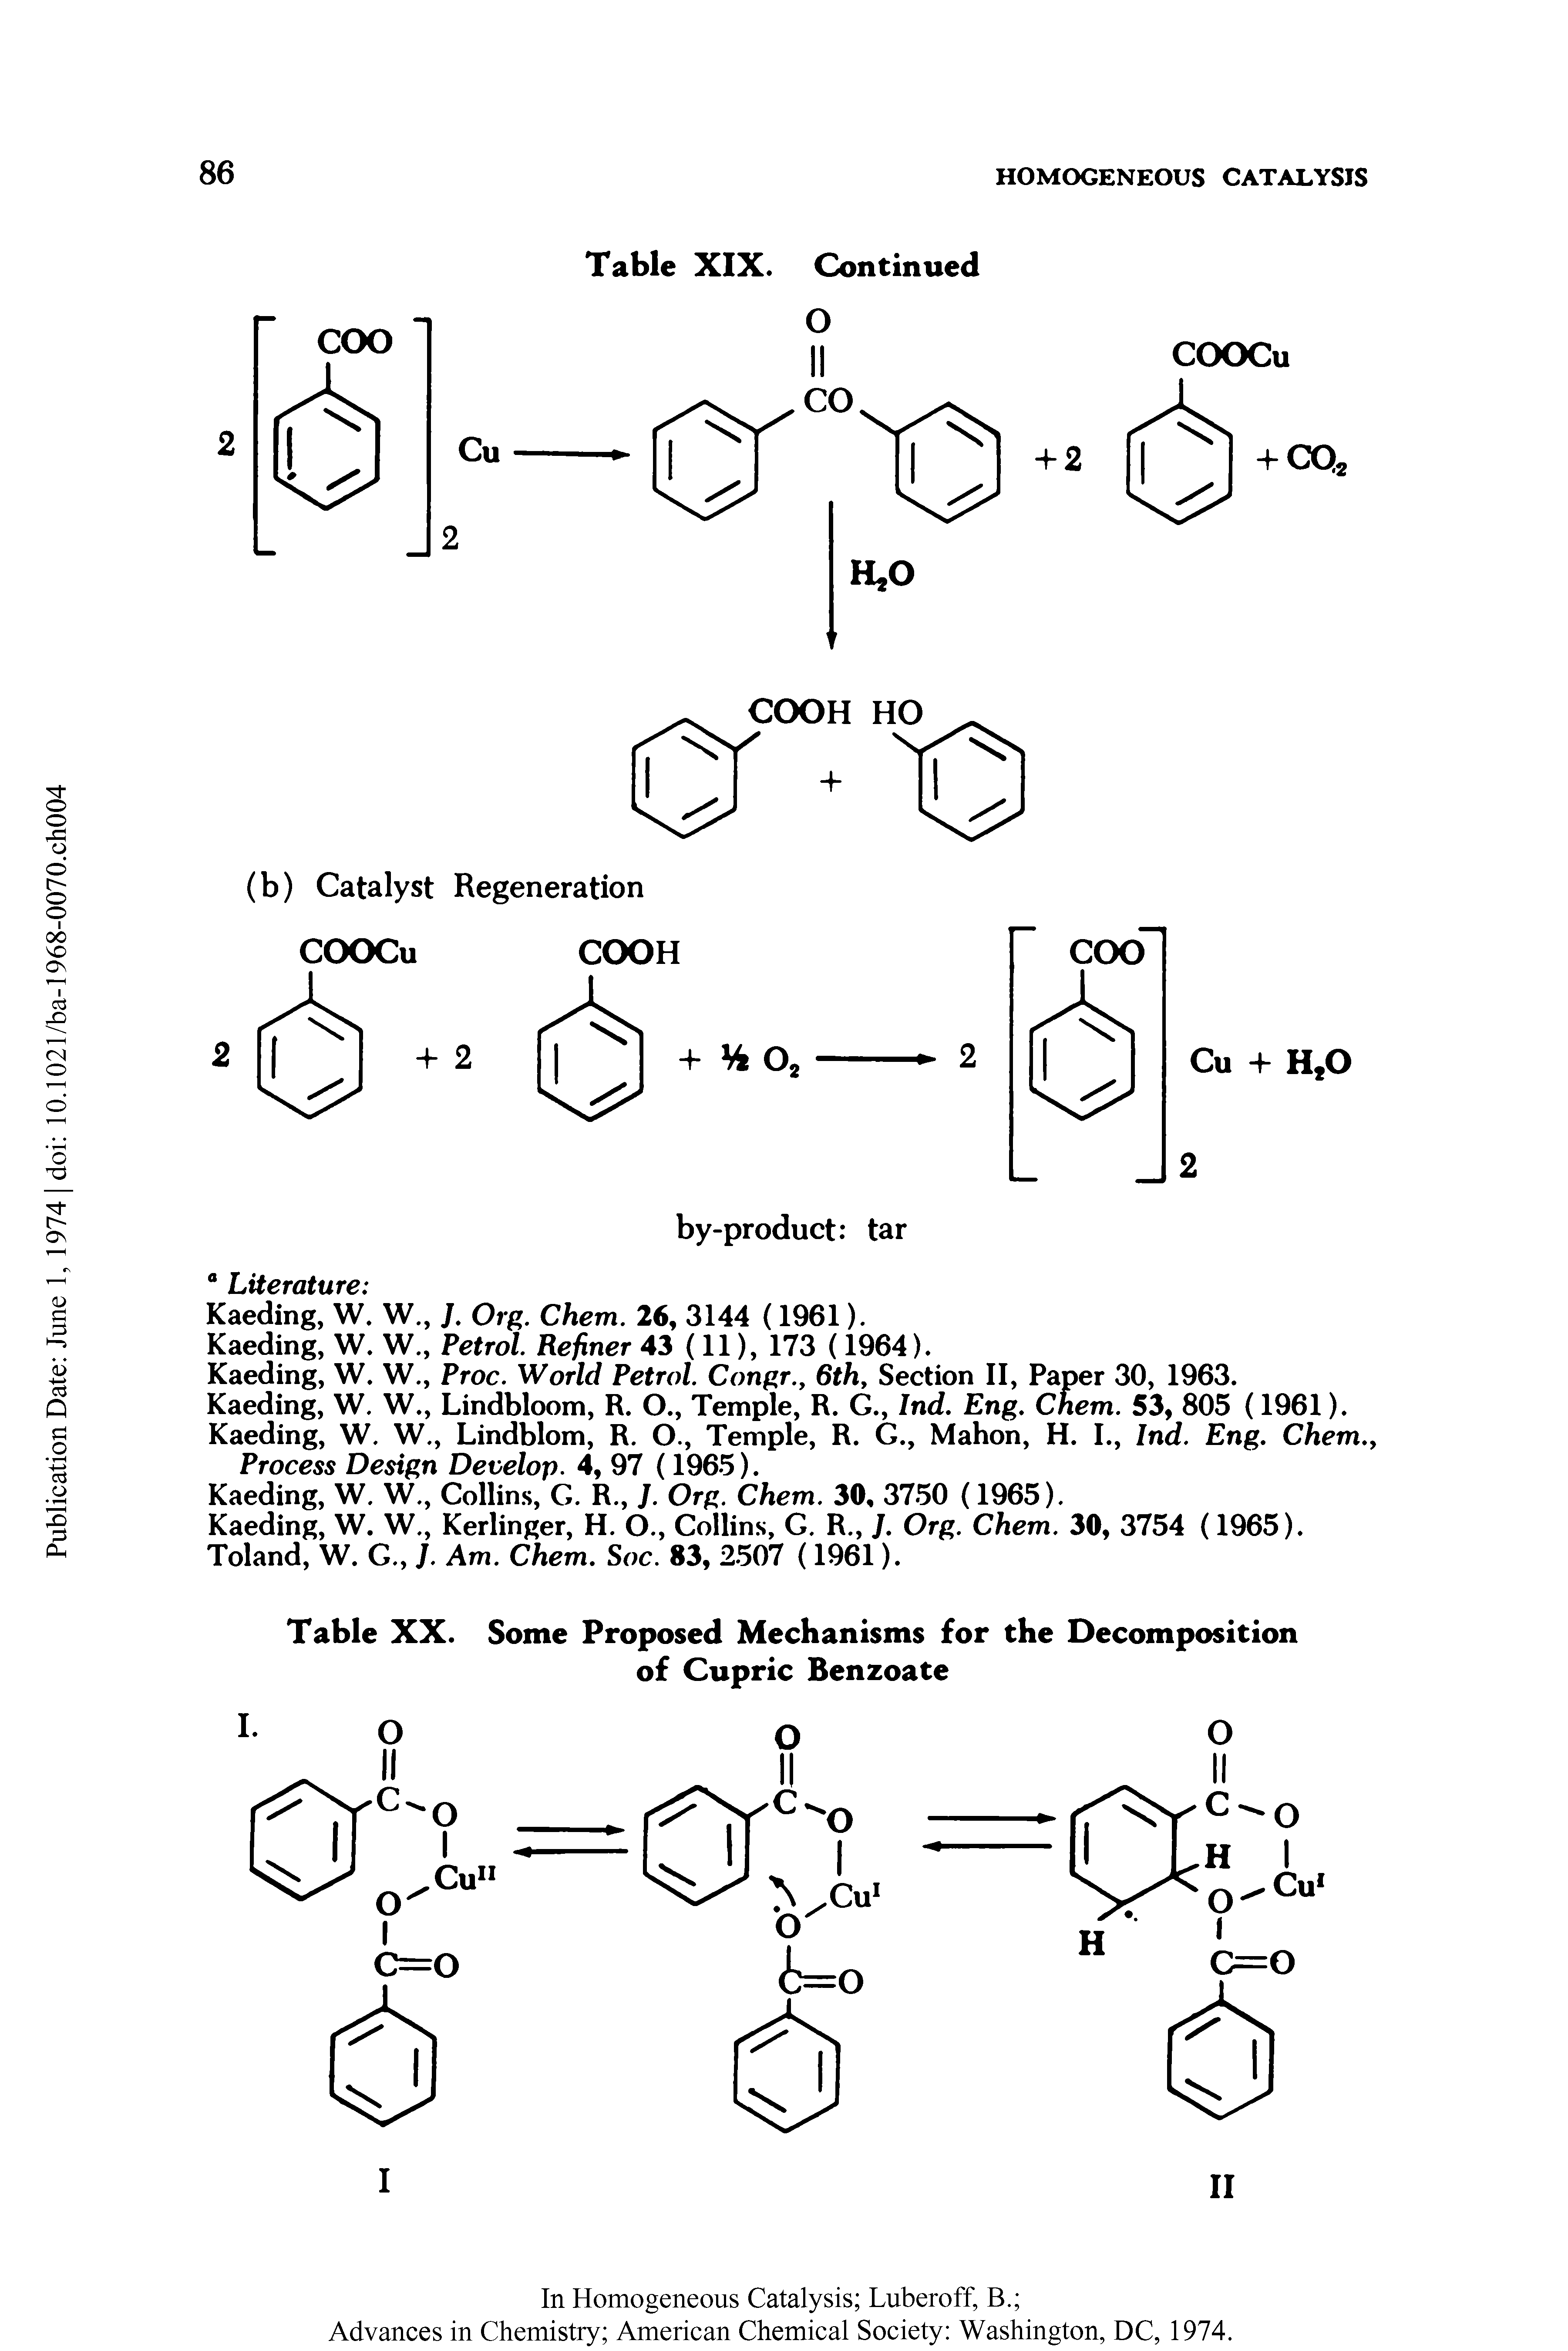 Table XX. Some Proposed Mechanisms for the Decomposition of Cupric Benzoate...